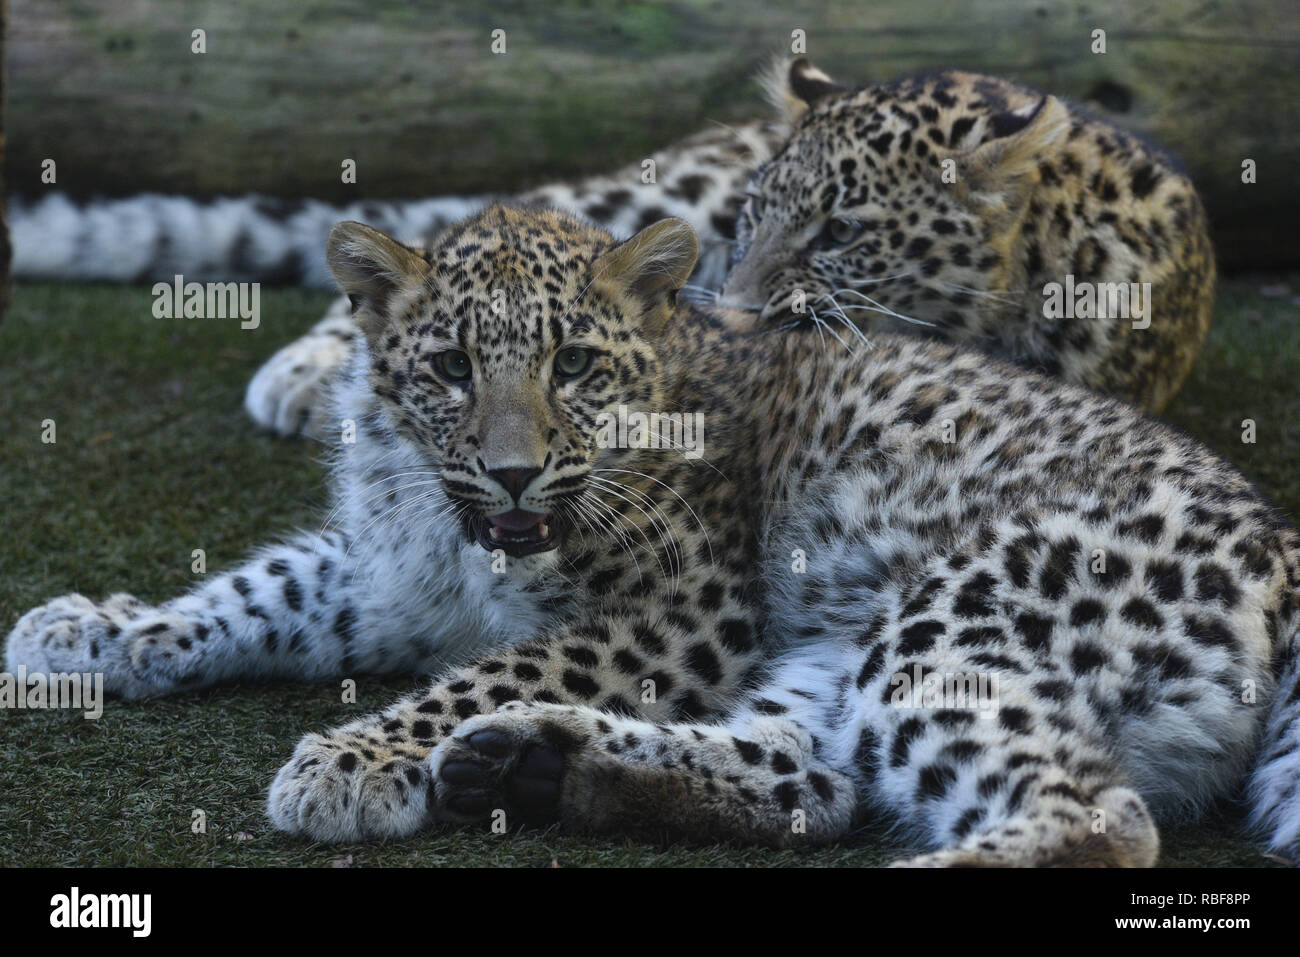 Madrid, Spain. 9th Jan, 2019. The babies Persian leopards seen in their enclosure at Madrid zoo. They were born on last April, 2018, after of 3 months of gestation, weighing about 0.5 kilograms. Credit: John Milner/SOPA Images/ZUMA Wire/Alamy Live News Stock Photo